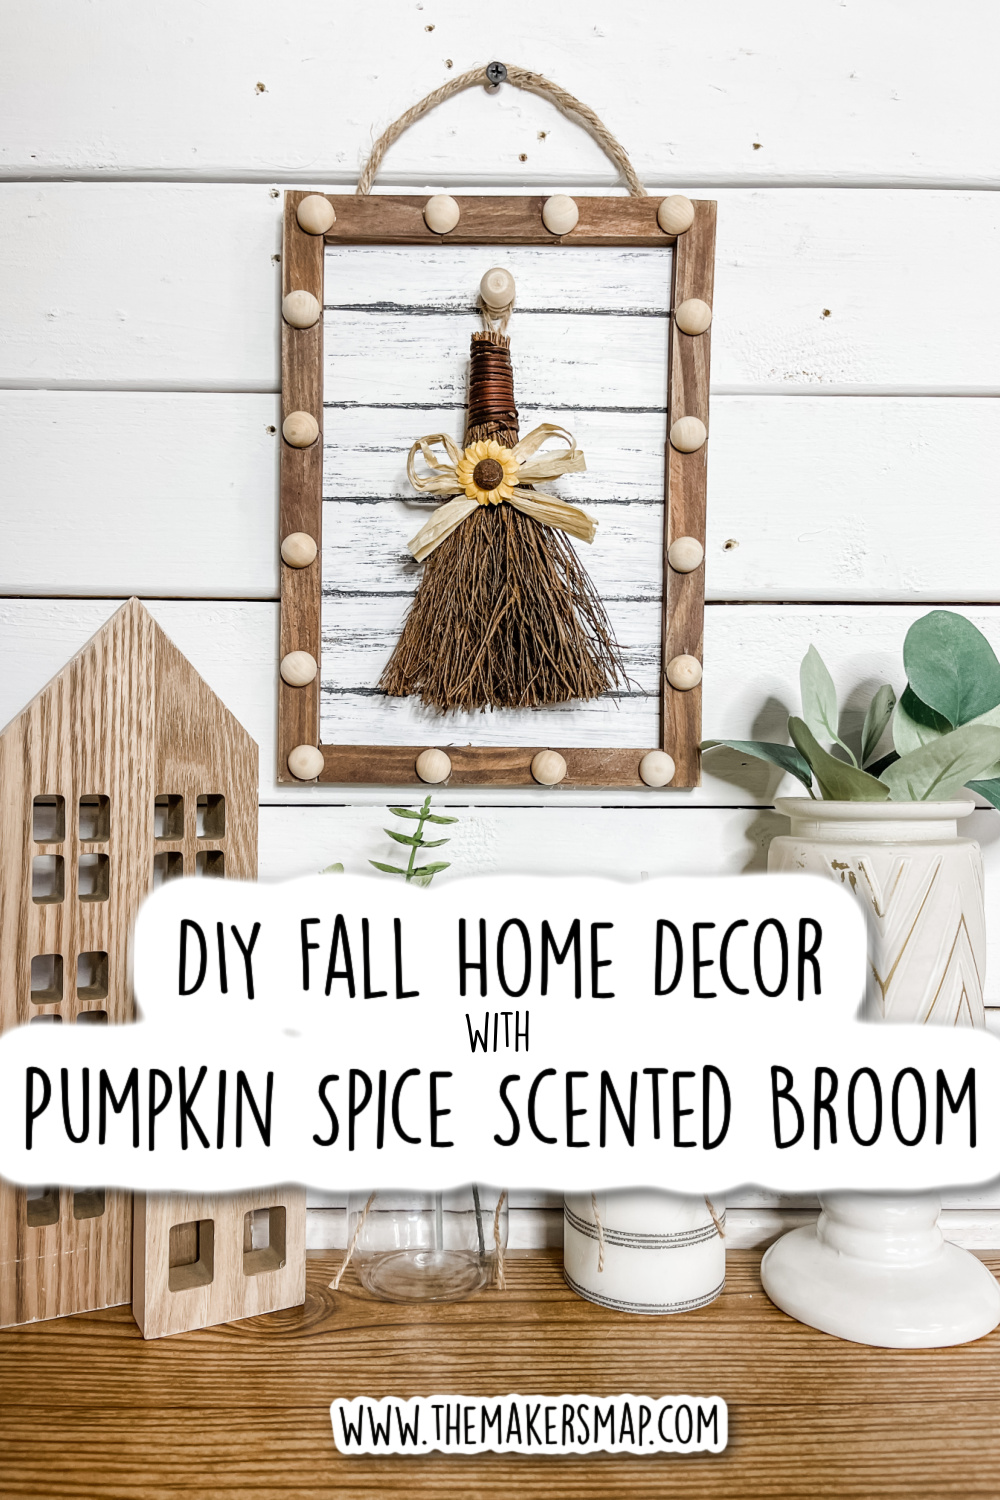 DIY Fall Home Decor with Pumpkin Spice Scented Broom